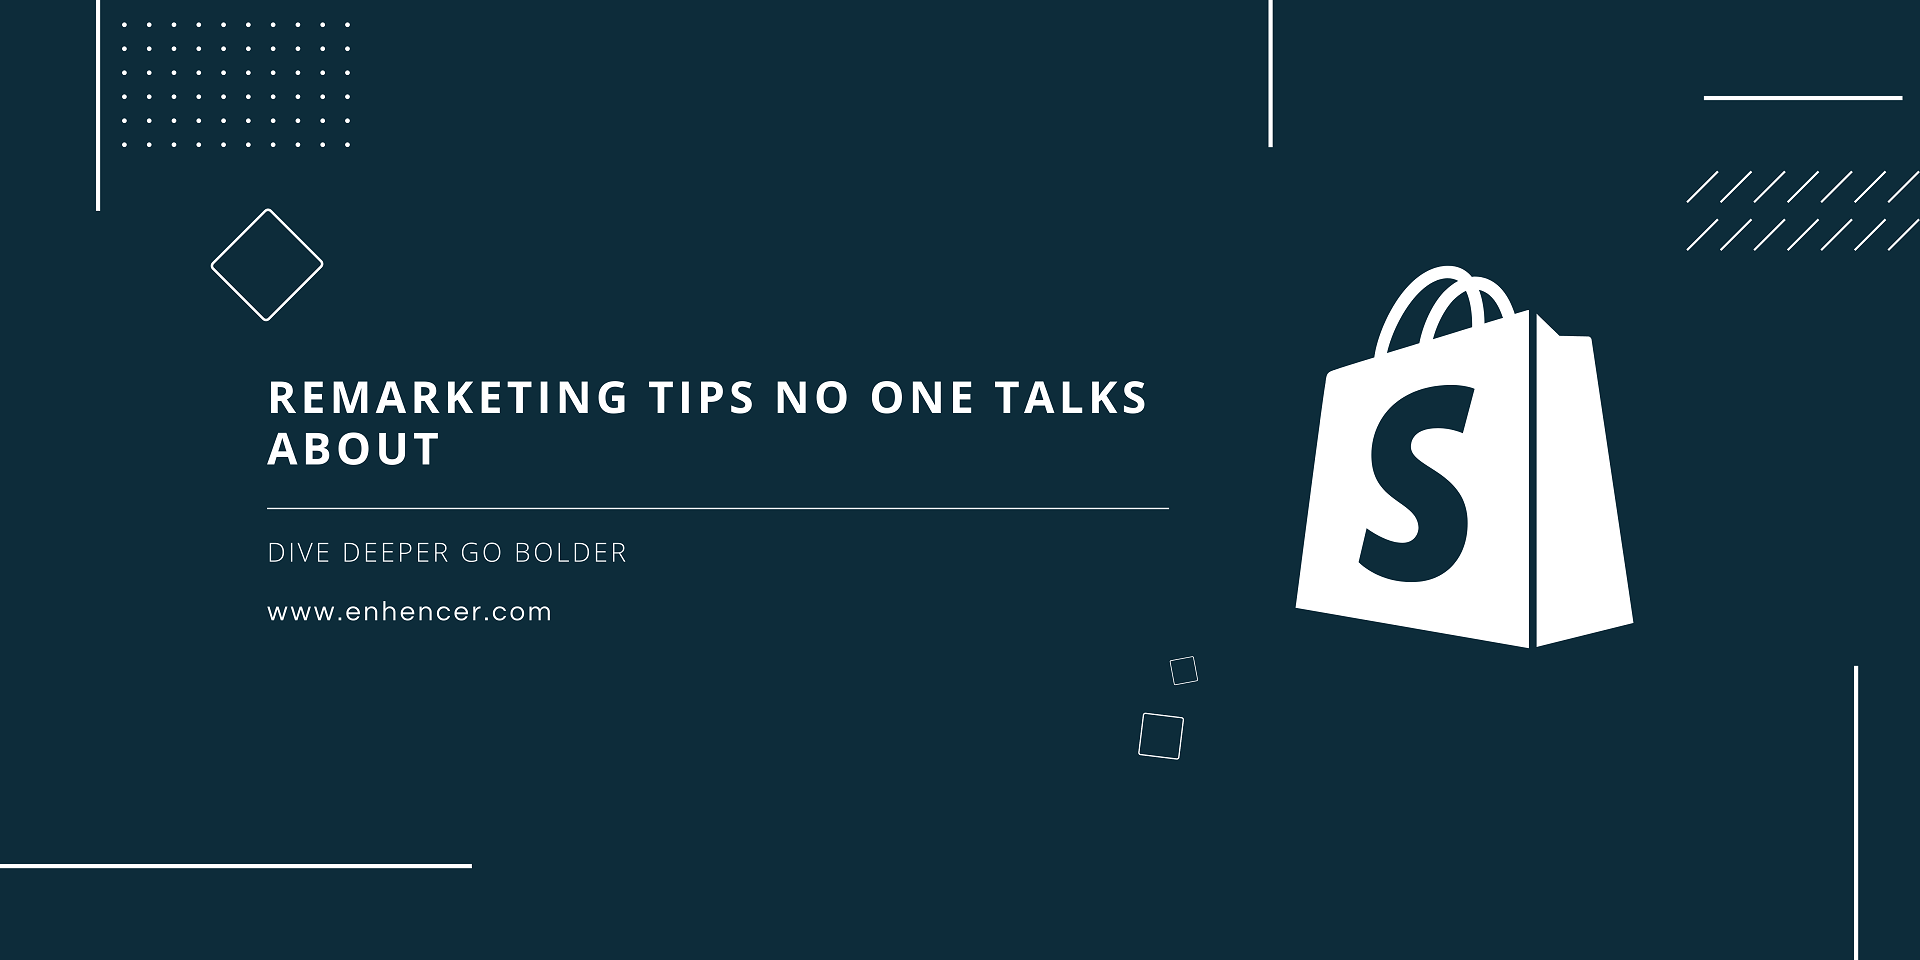 Remarketing Tips No One Talks About